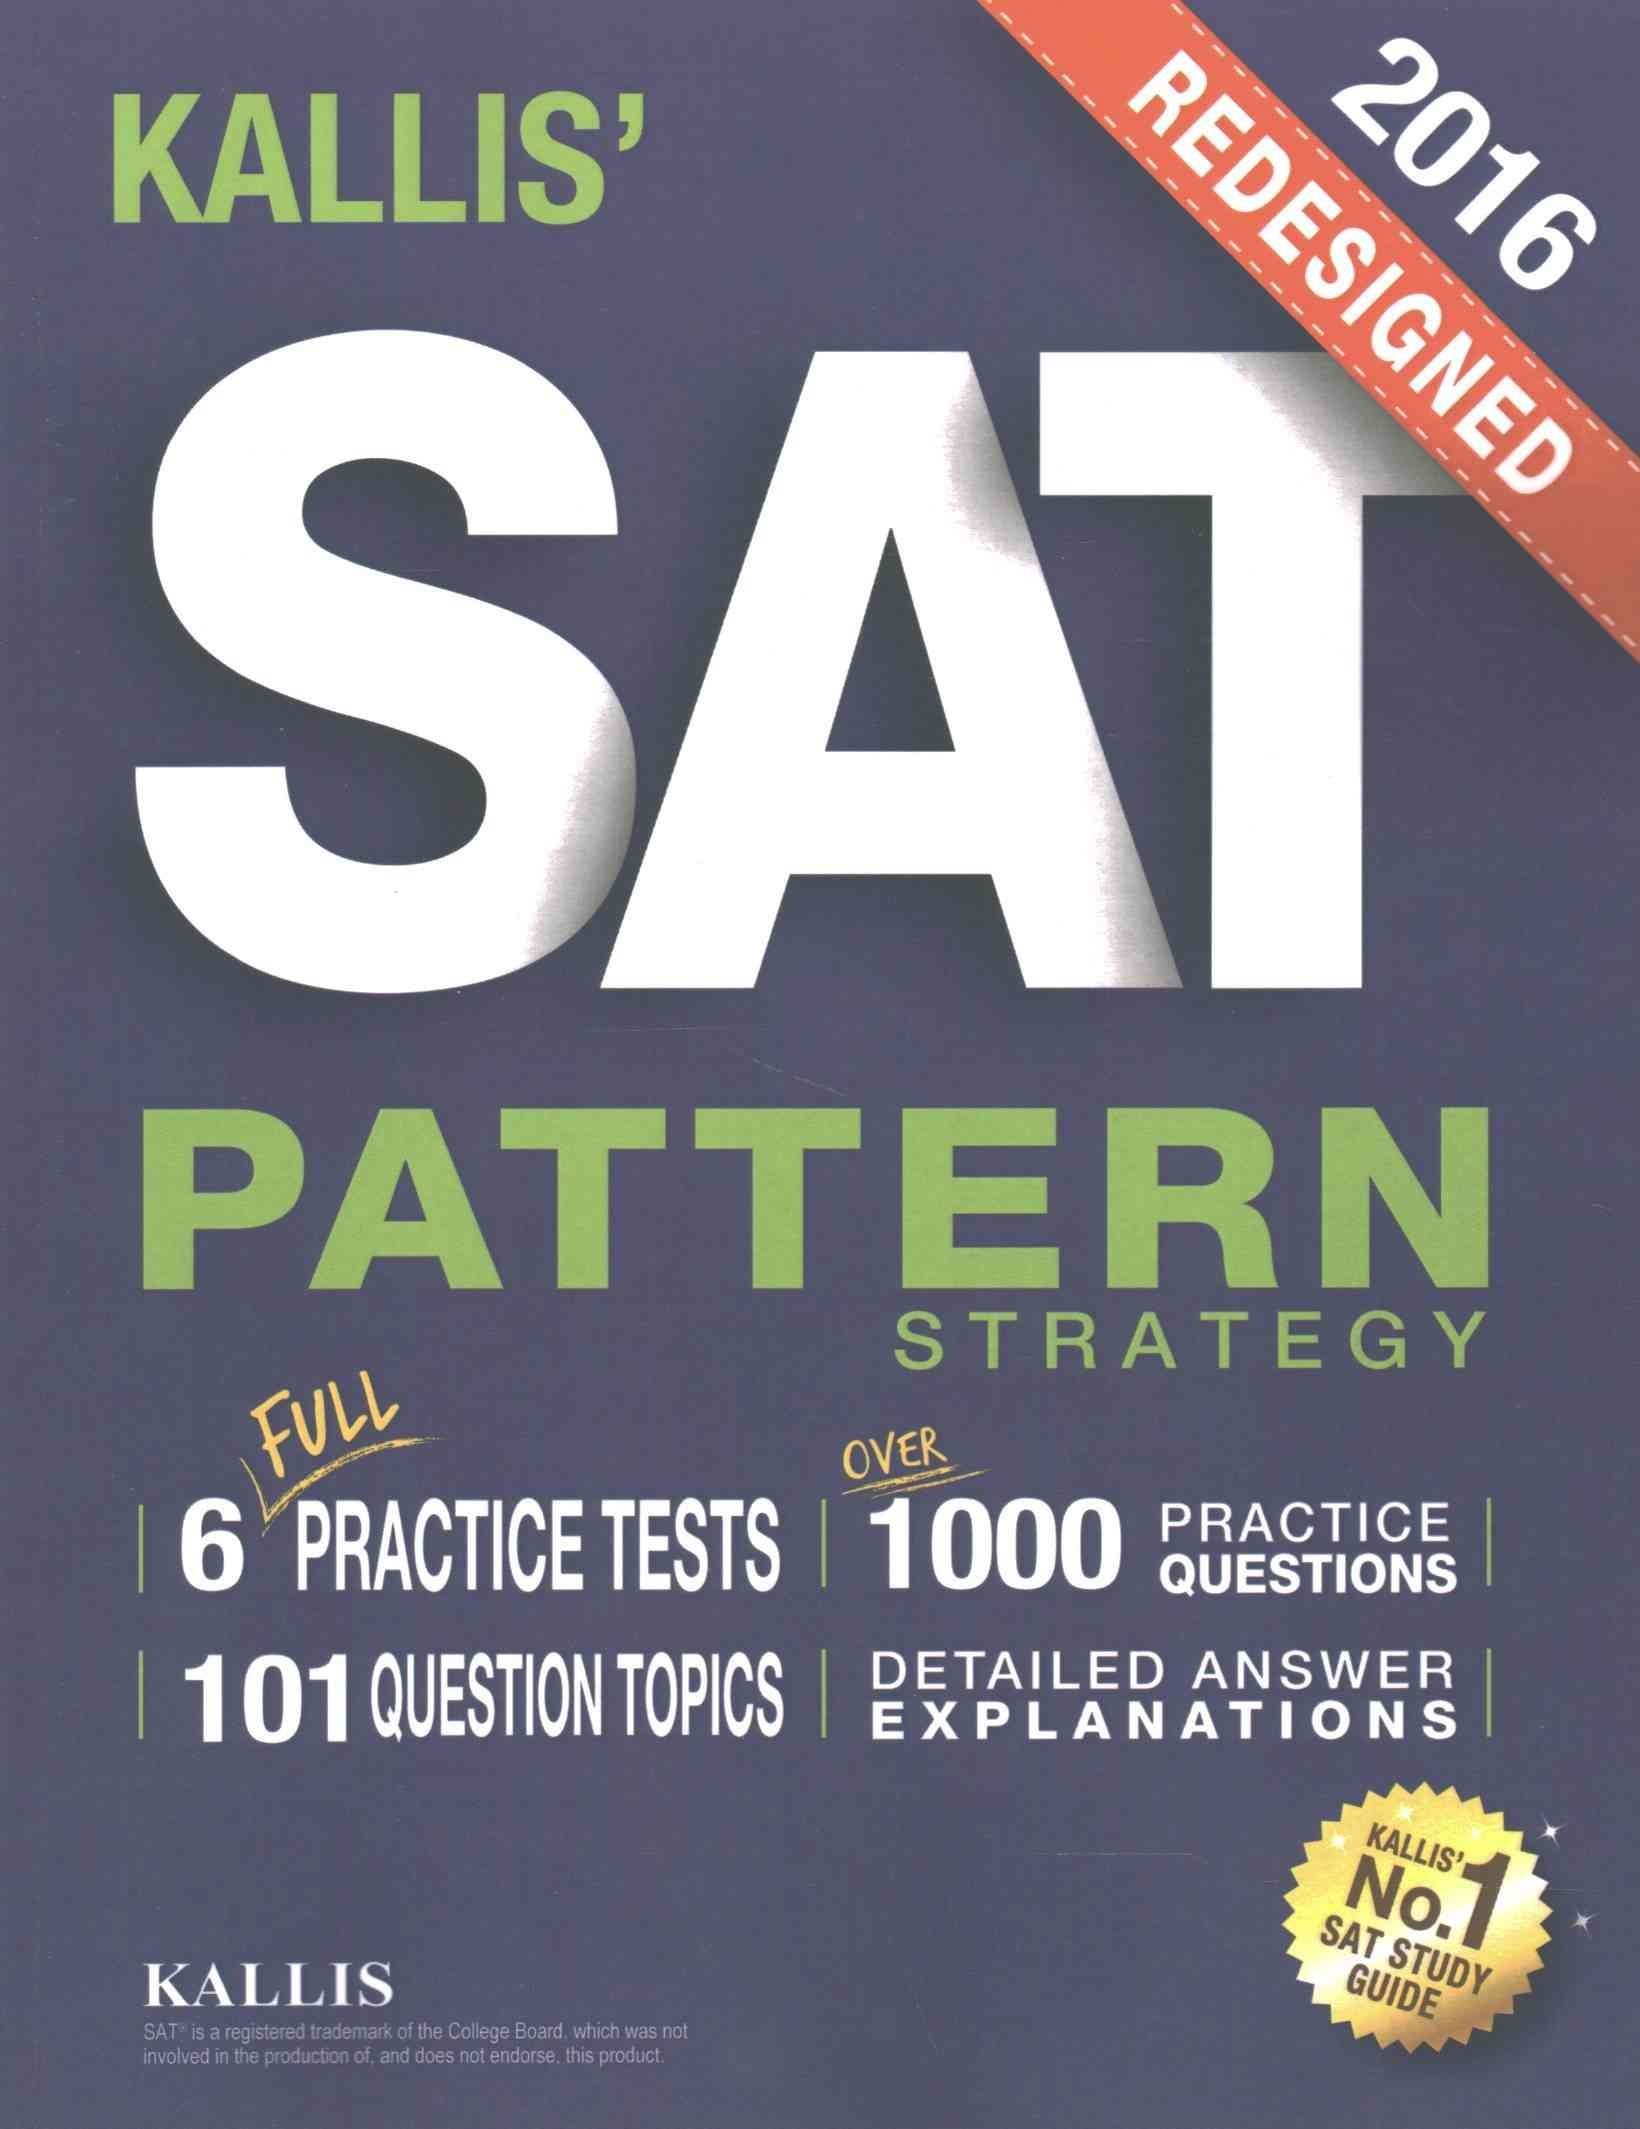 KALLIS' Redesigned SAT Pattern Strategy + 6 Full Length Practice Tests (College SAT Prep + Study Guide Book for the New SAT) - Second edition